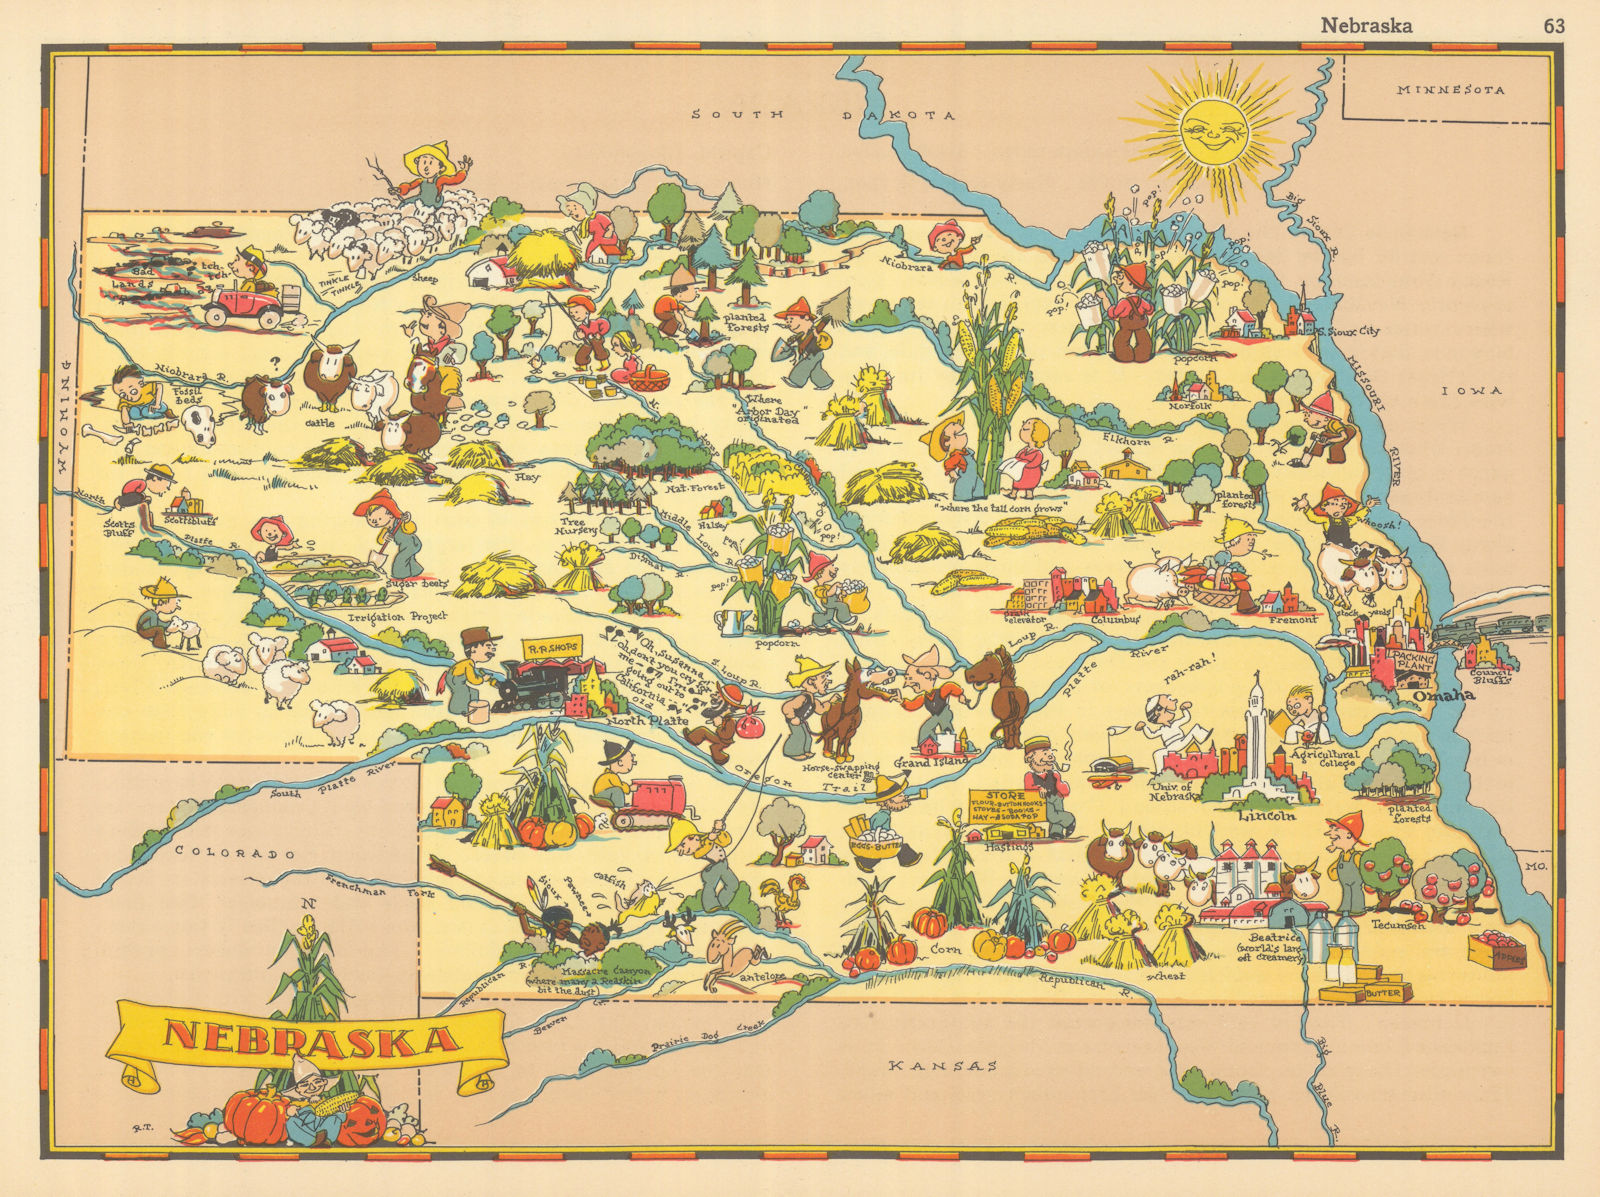 Nebraska. Pictorial state map by Ruth Taylor White 1935 old vintage chart